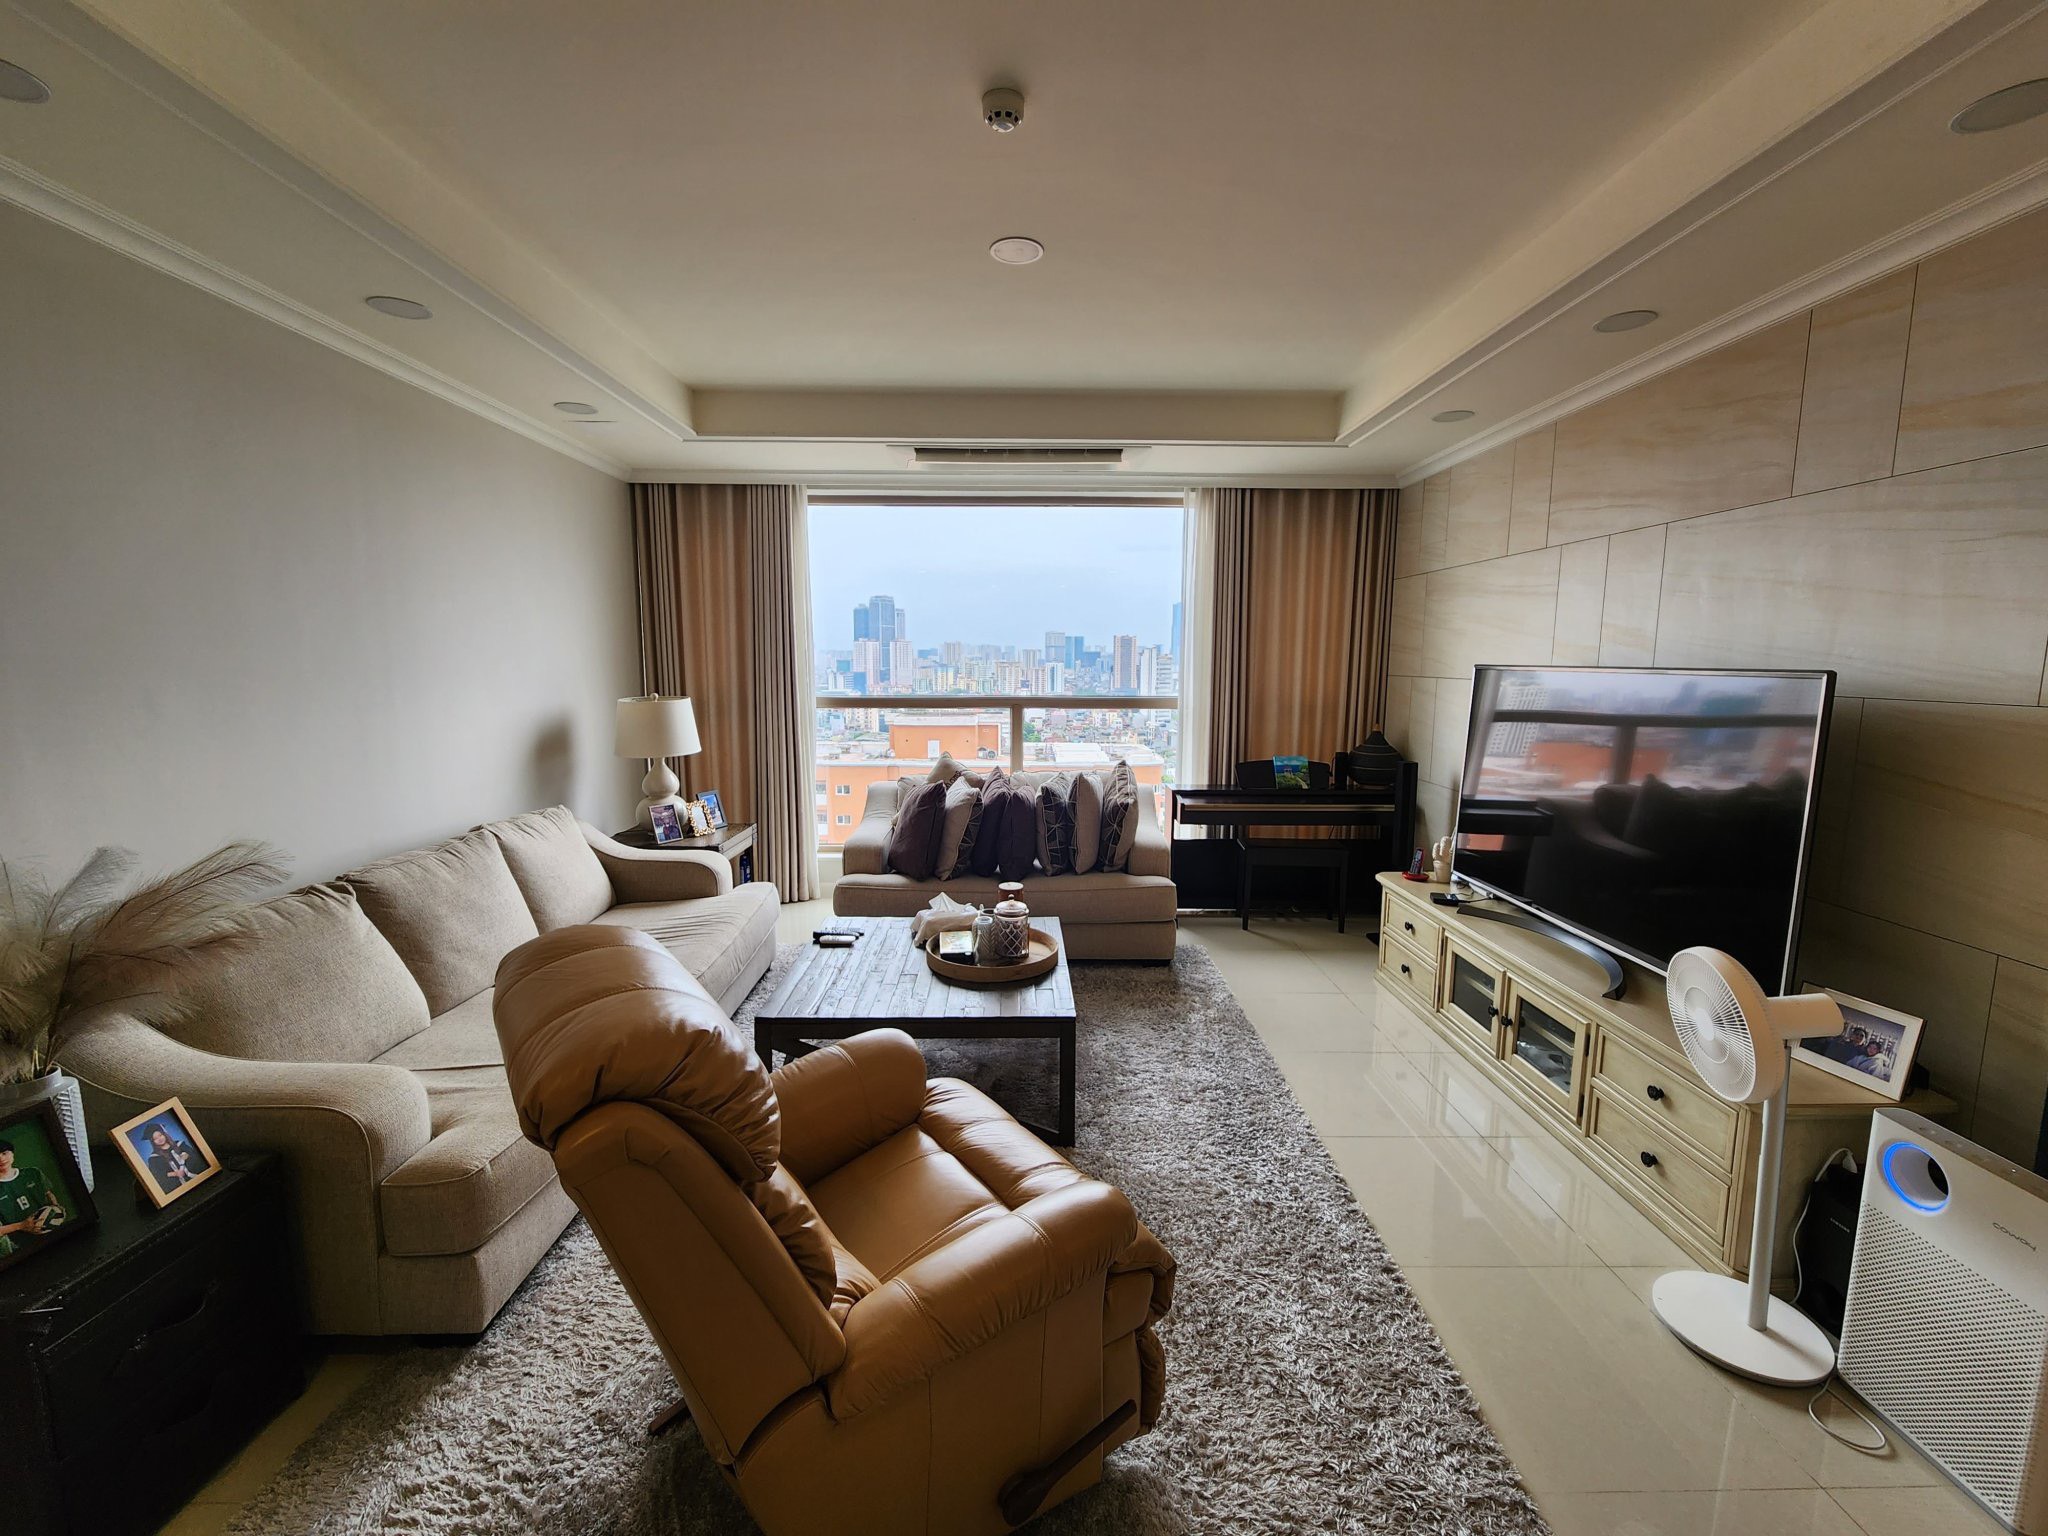 An apartment K for rent in Starlake - 177sqm - Fully furnished